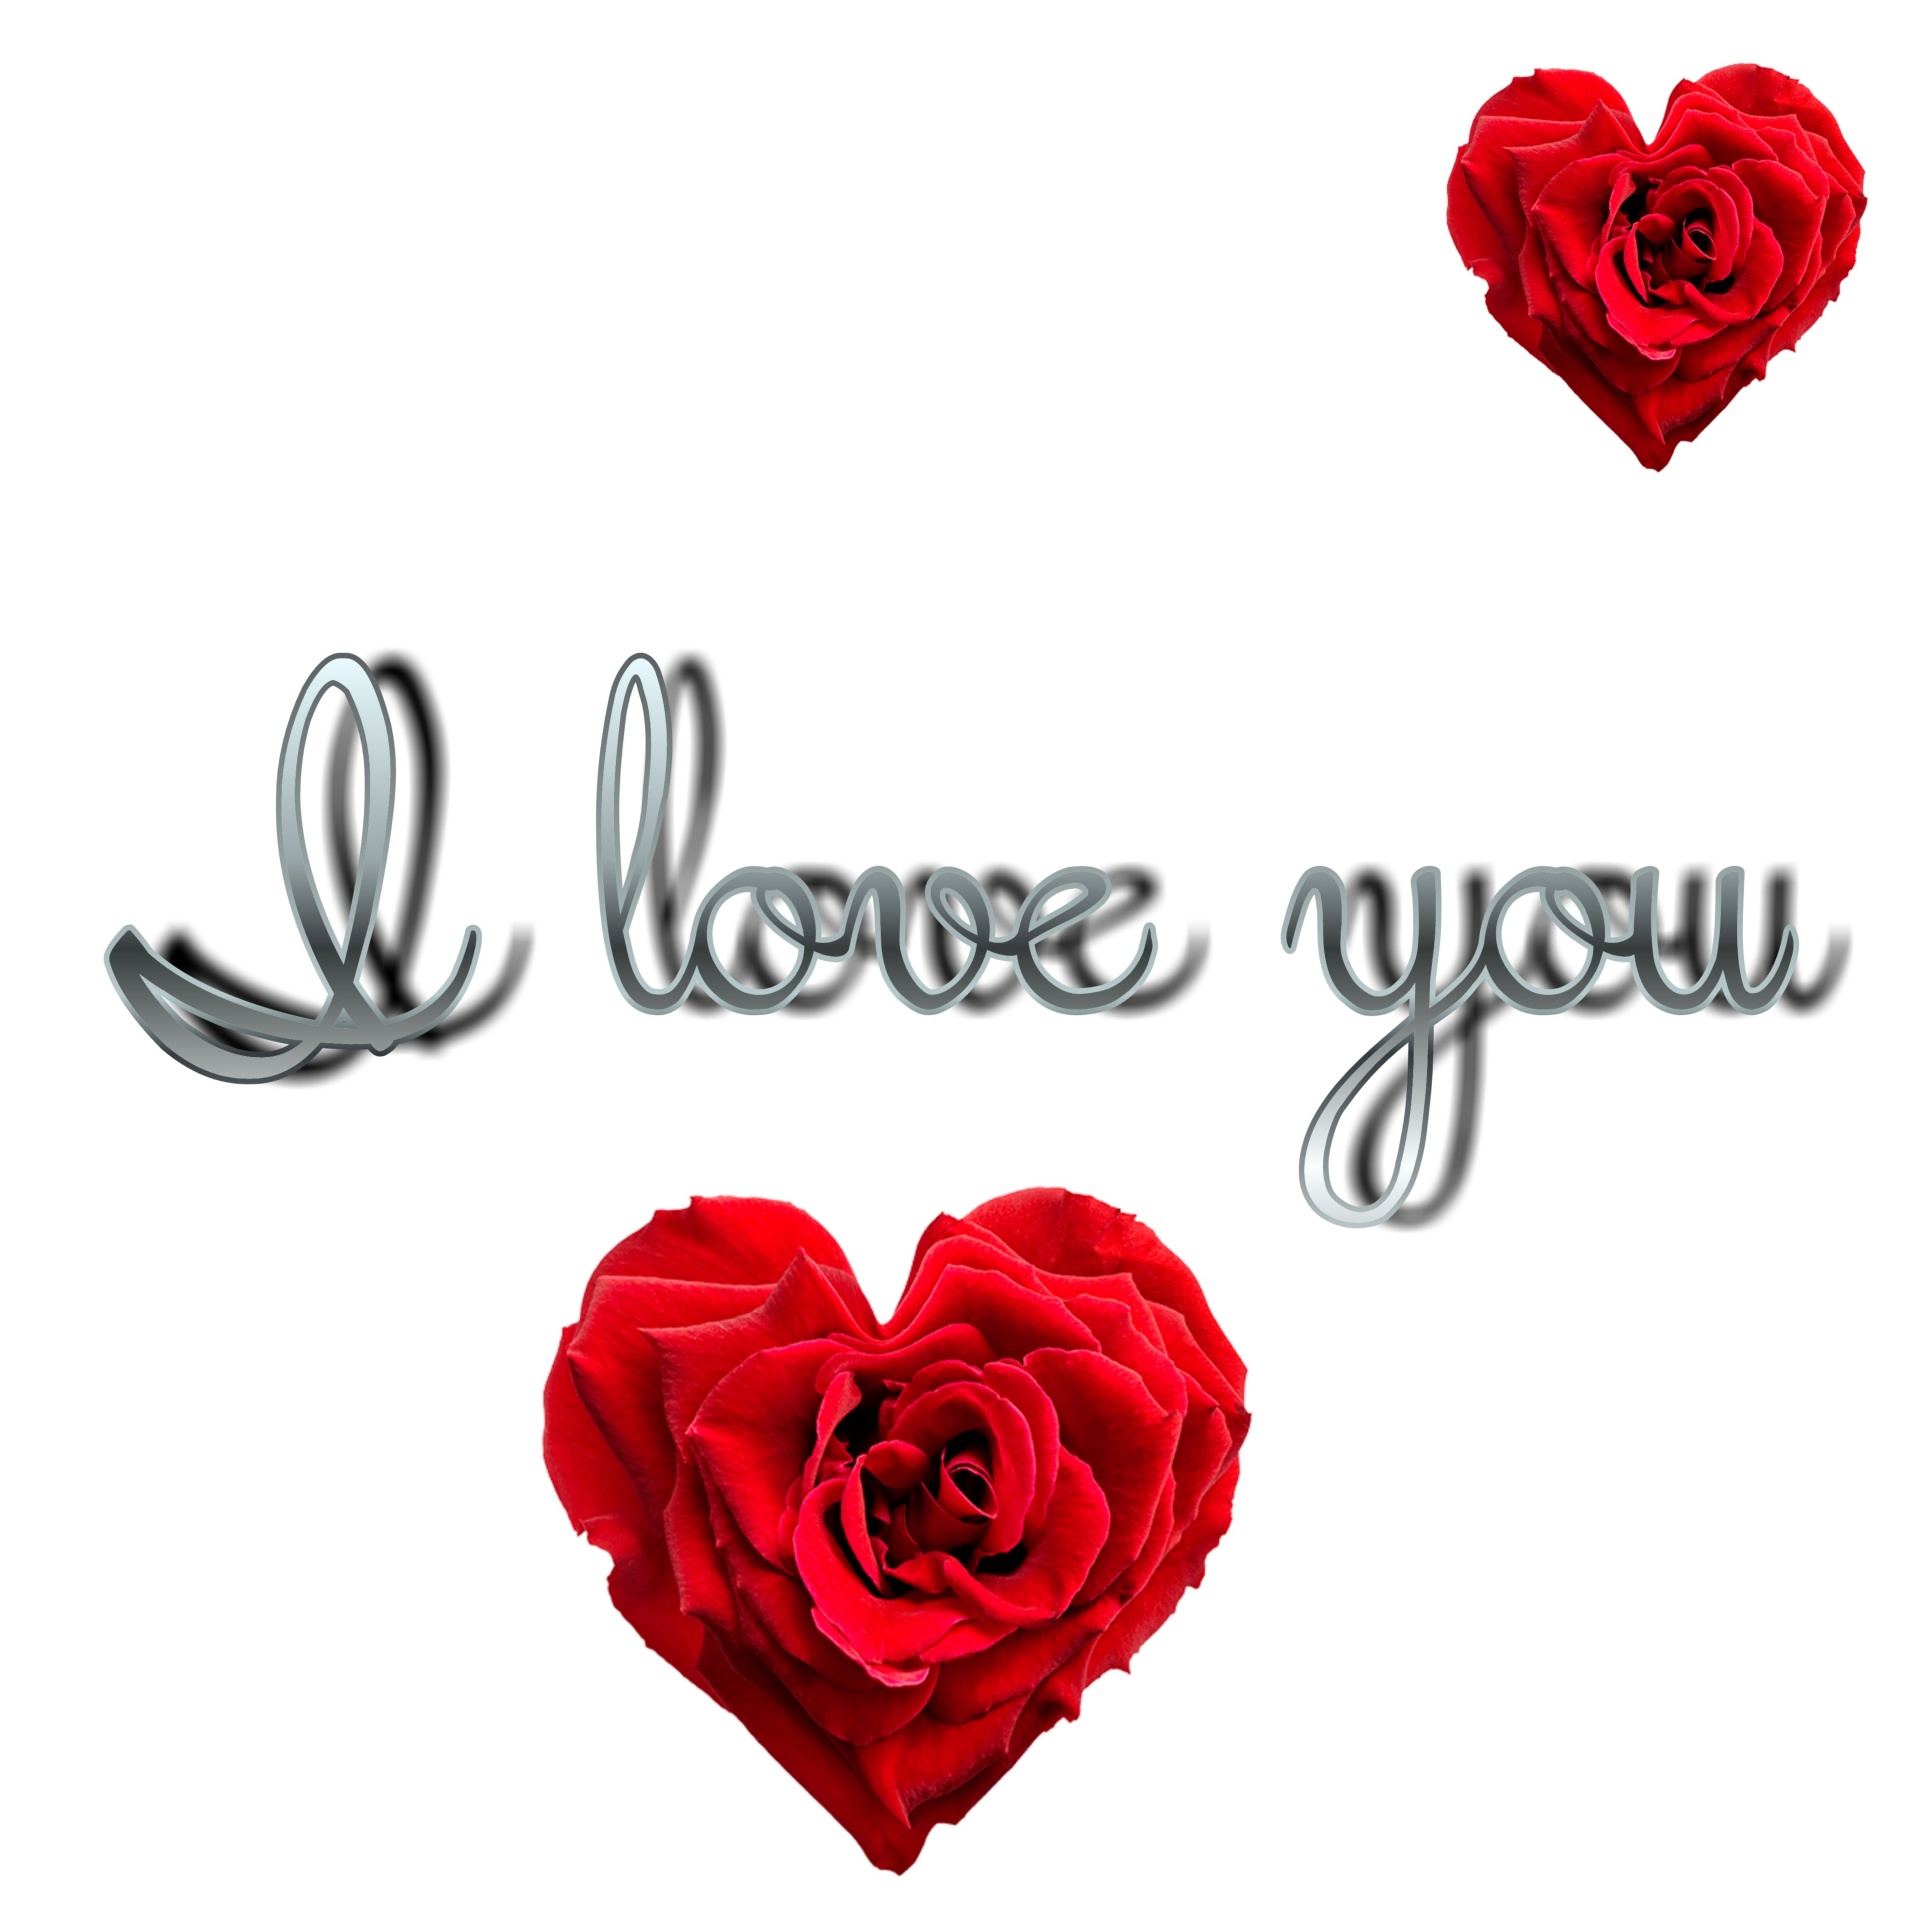 love you text free photo